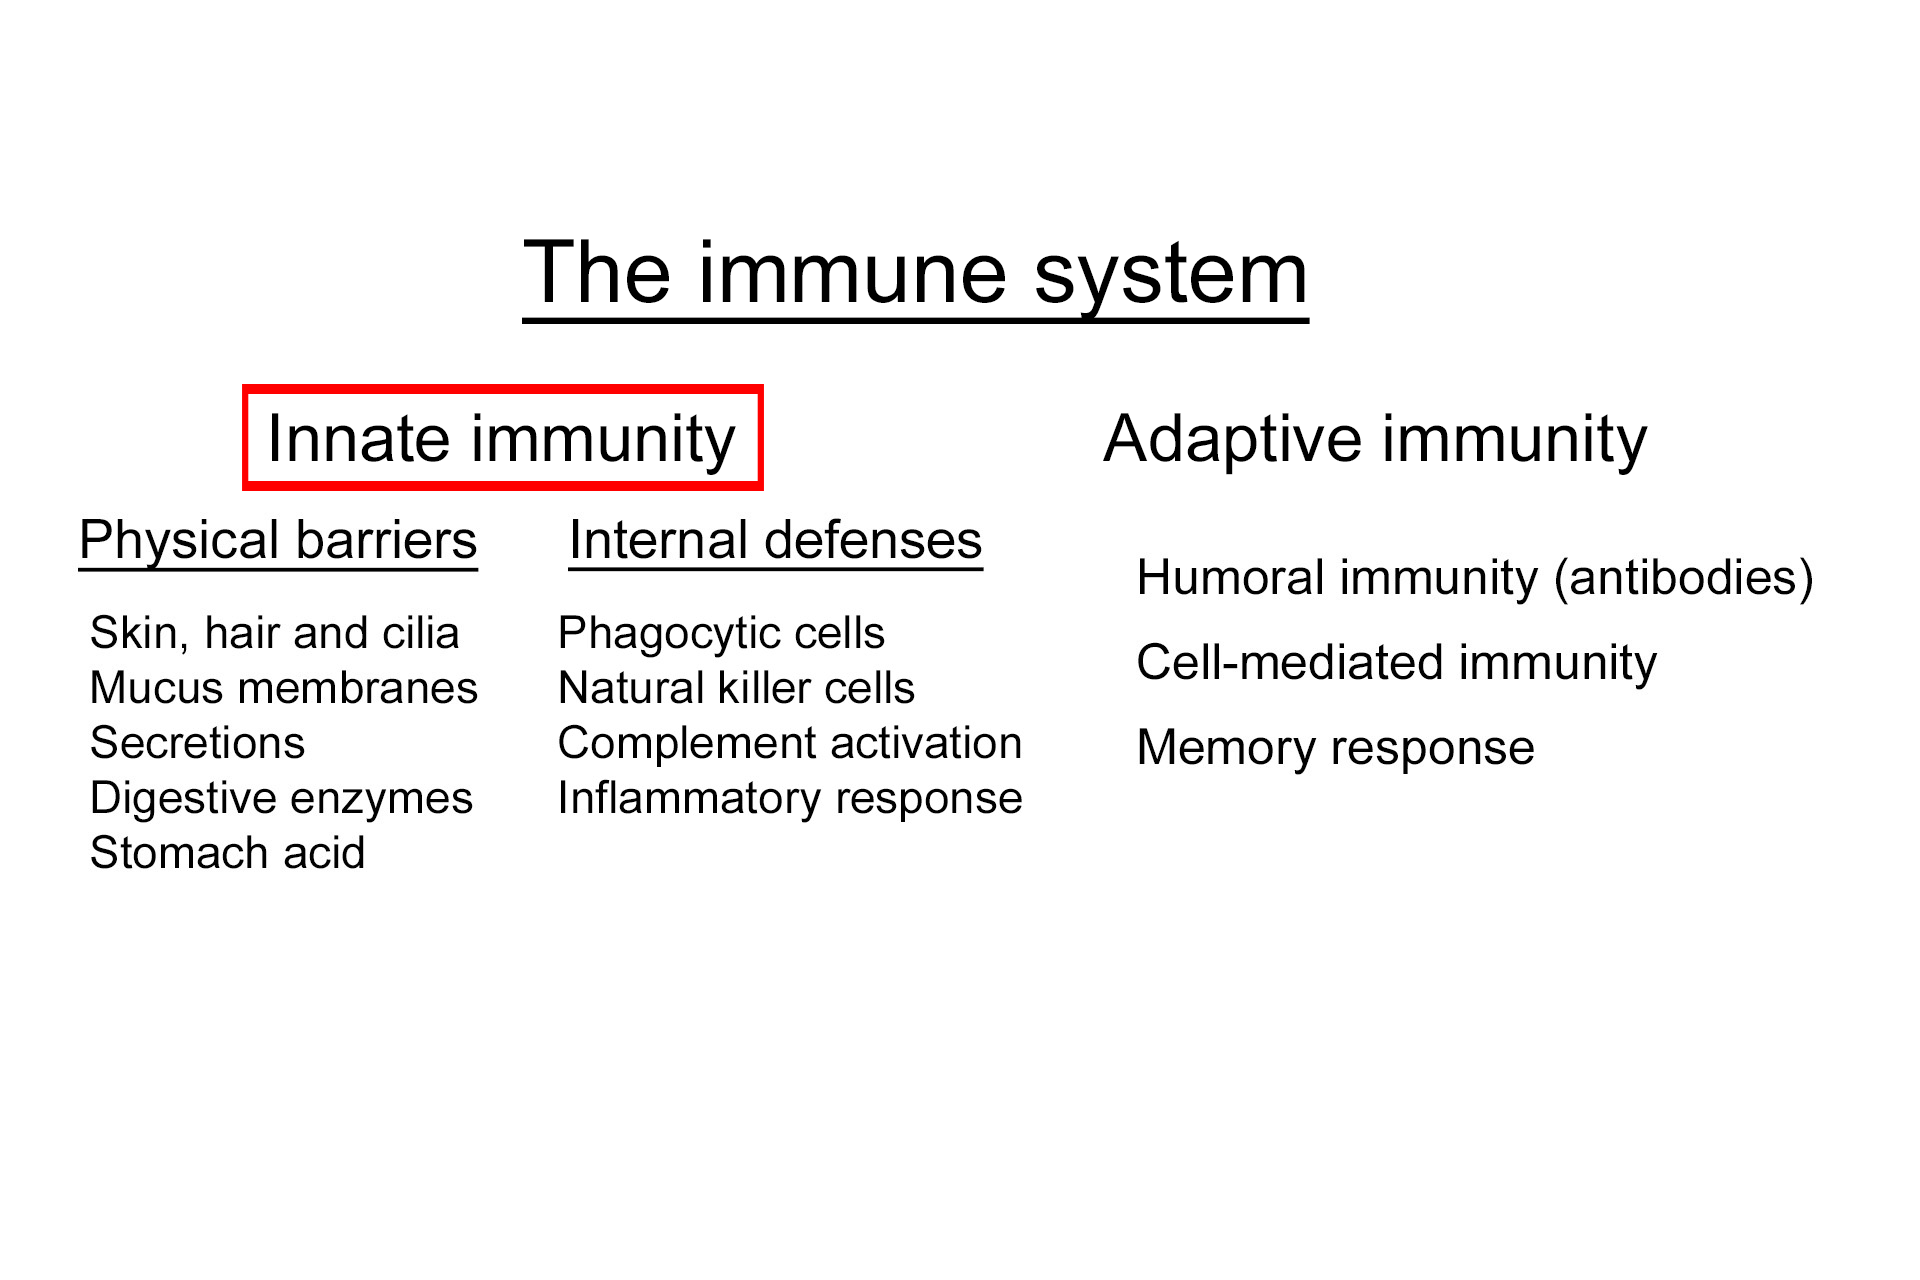  - Innate immunity >  <p>Innate immunity, the so-called “first line of defense”, consists of components that are present at birth as well as others that develop over the lifespan of an individual.  Responses of the innate immune system are rapid (minutes to hours) and less specific than those of the adaptive immune system, which can require weeks.  The innate system can also inform and modulate the adaptive immune response.</p>
